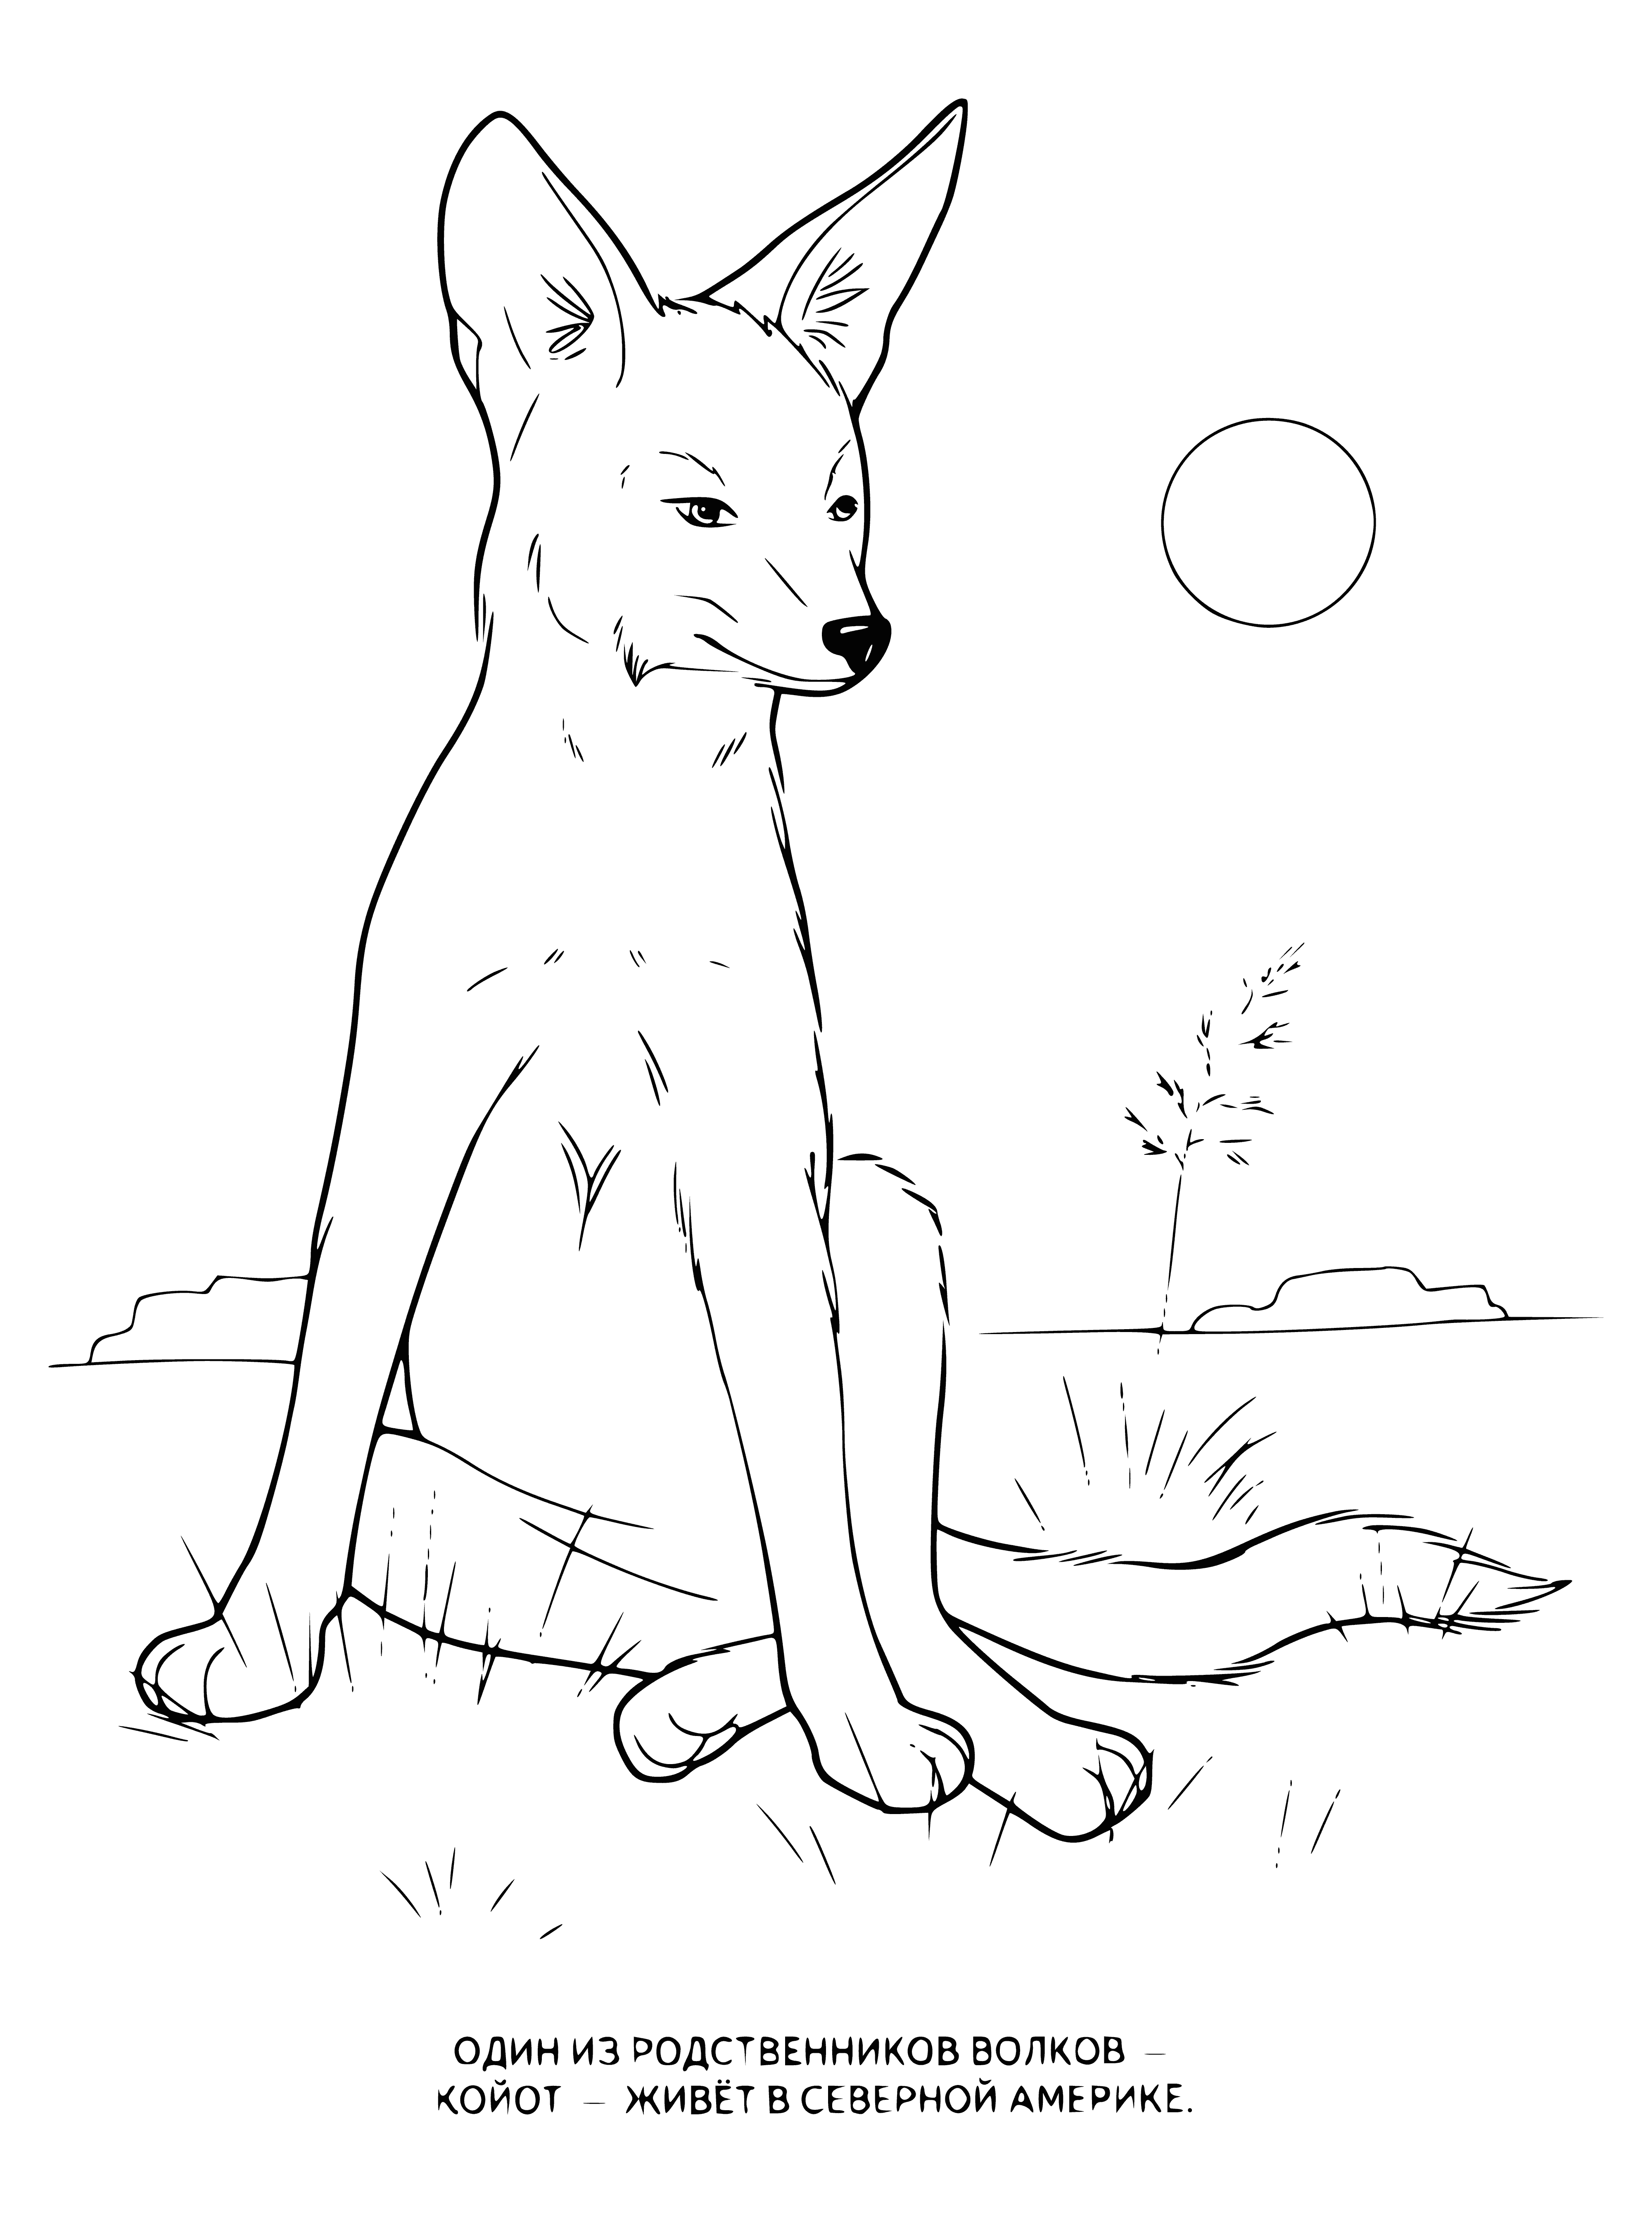 Coyote coloring page